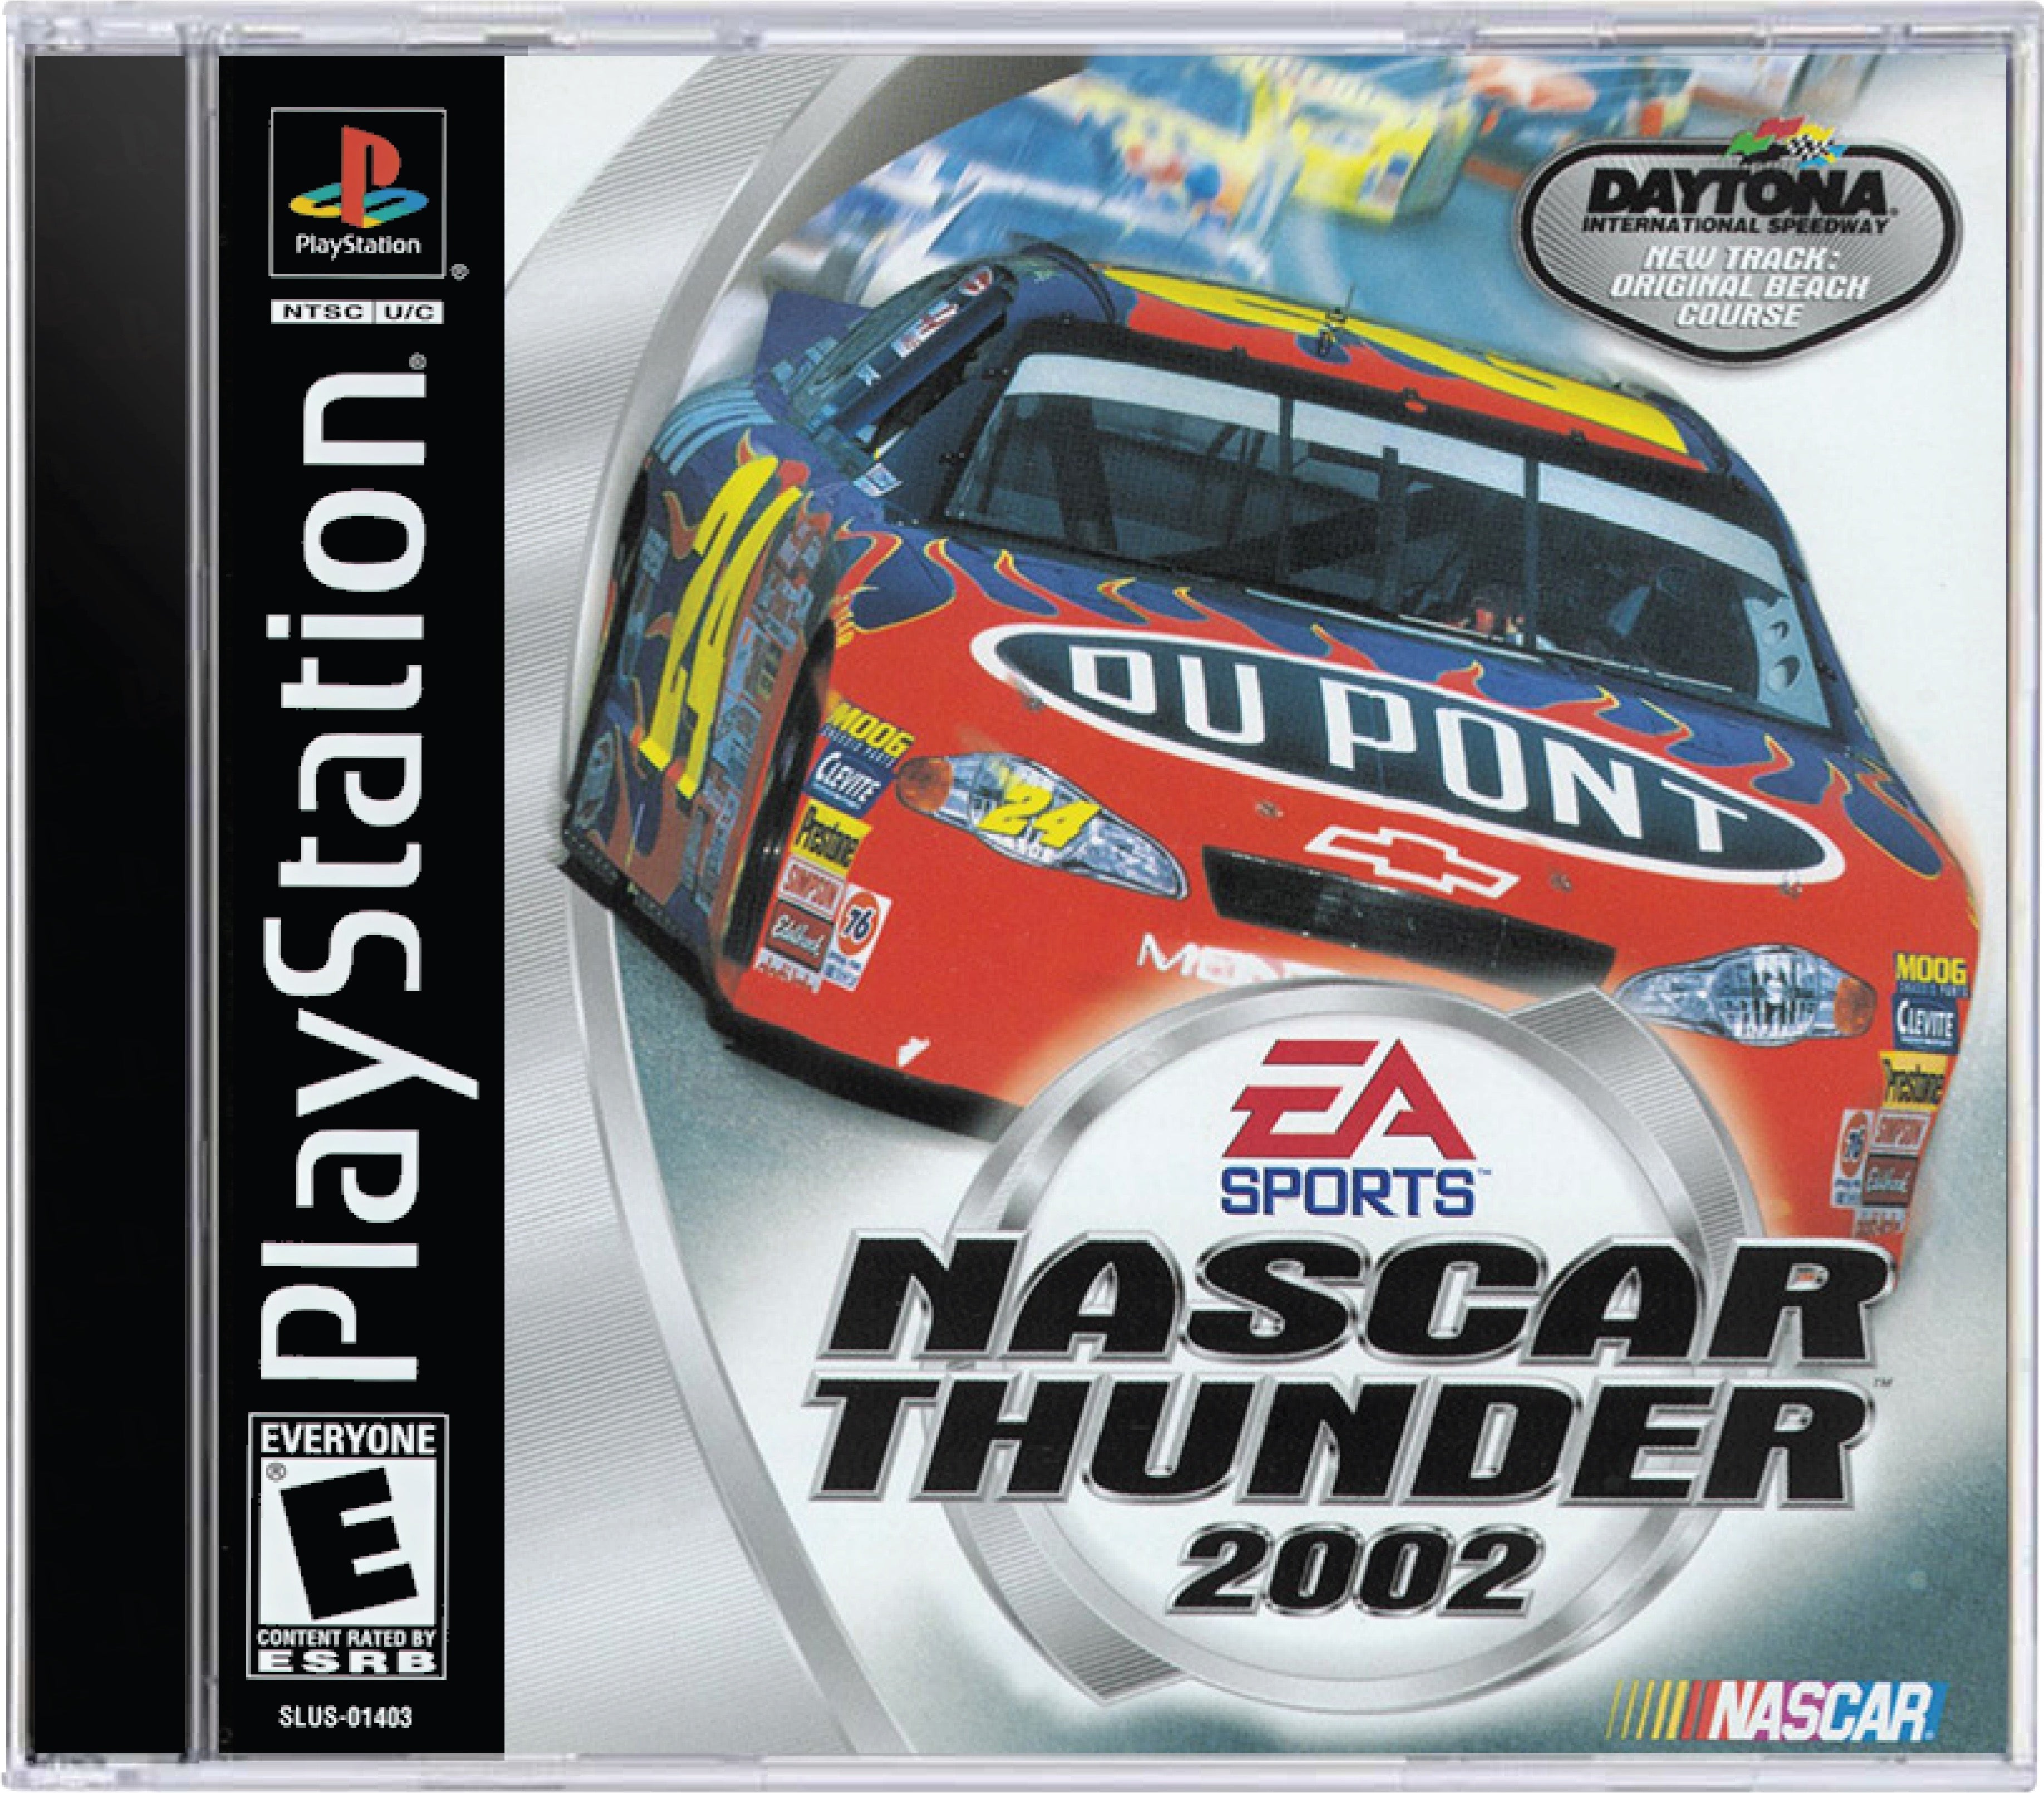 NASCAR Thunder 2002 Cover Art and Product Photo